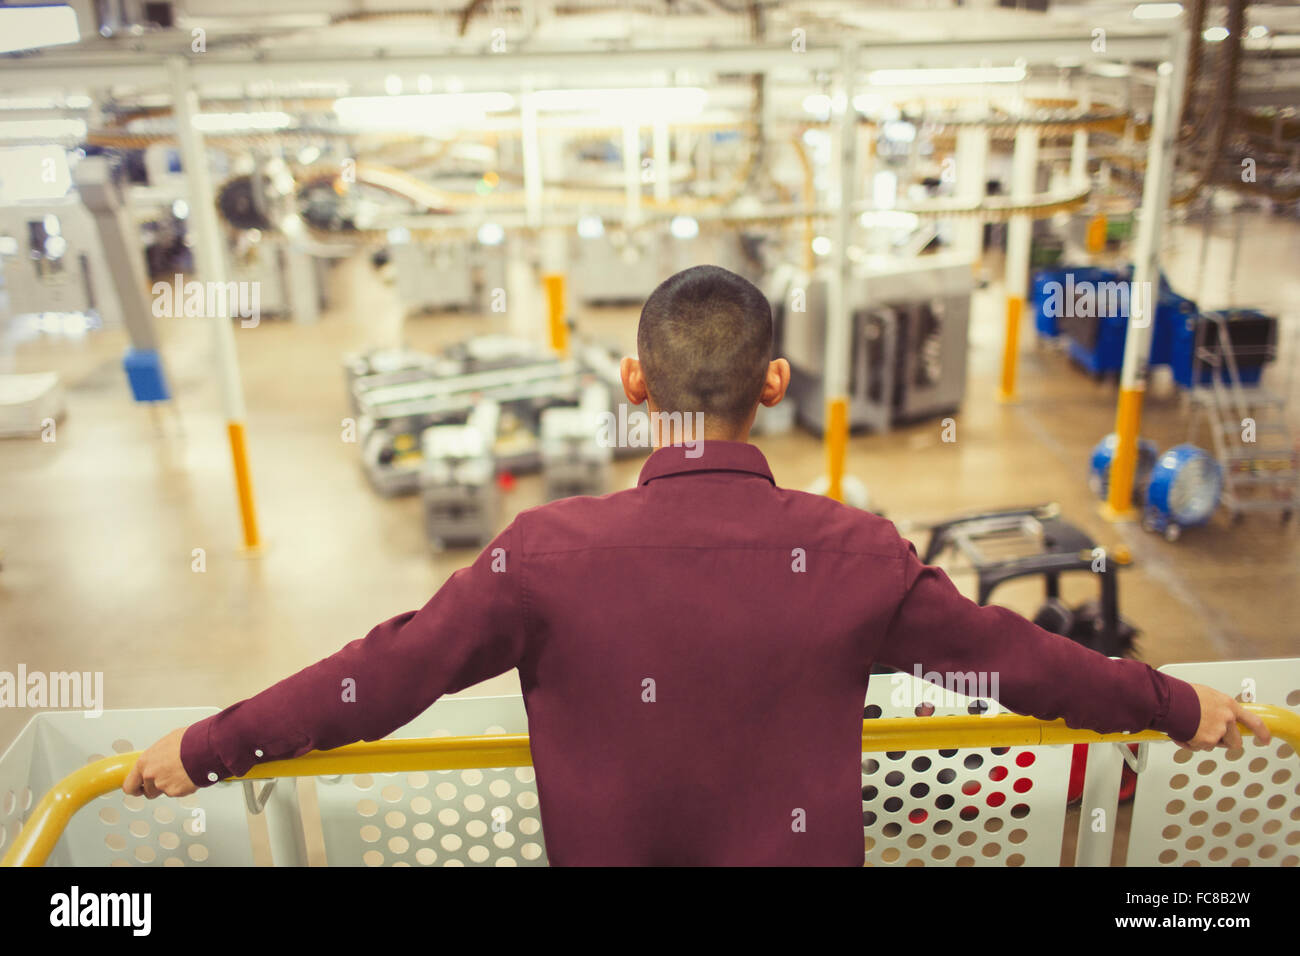 Supervisor on platform looking out over factory Stock Photo